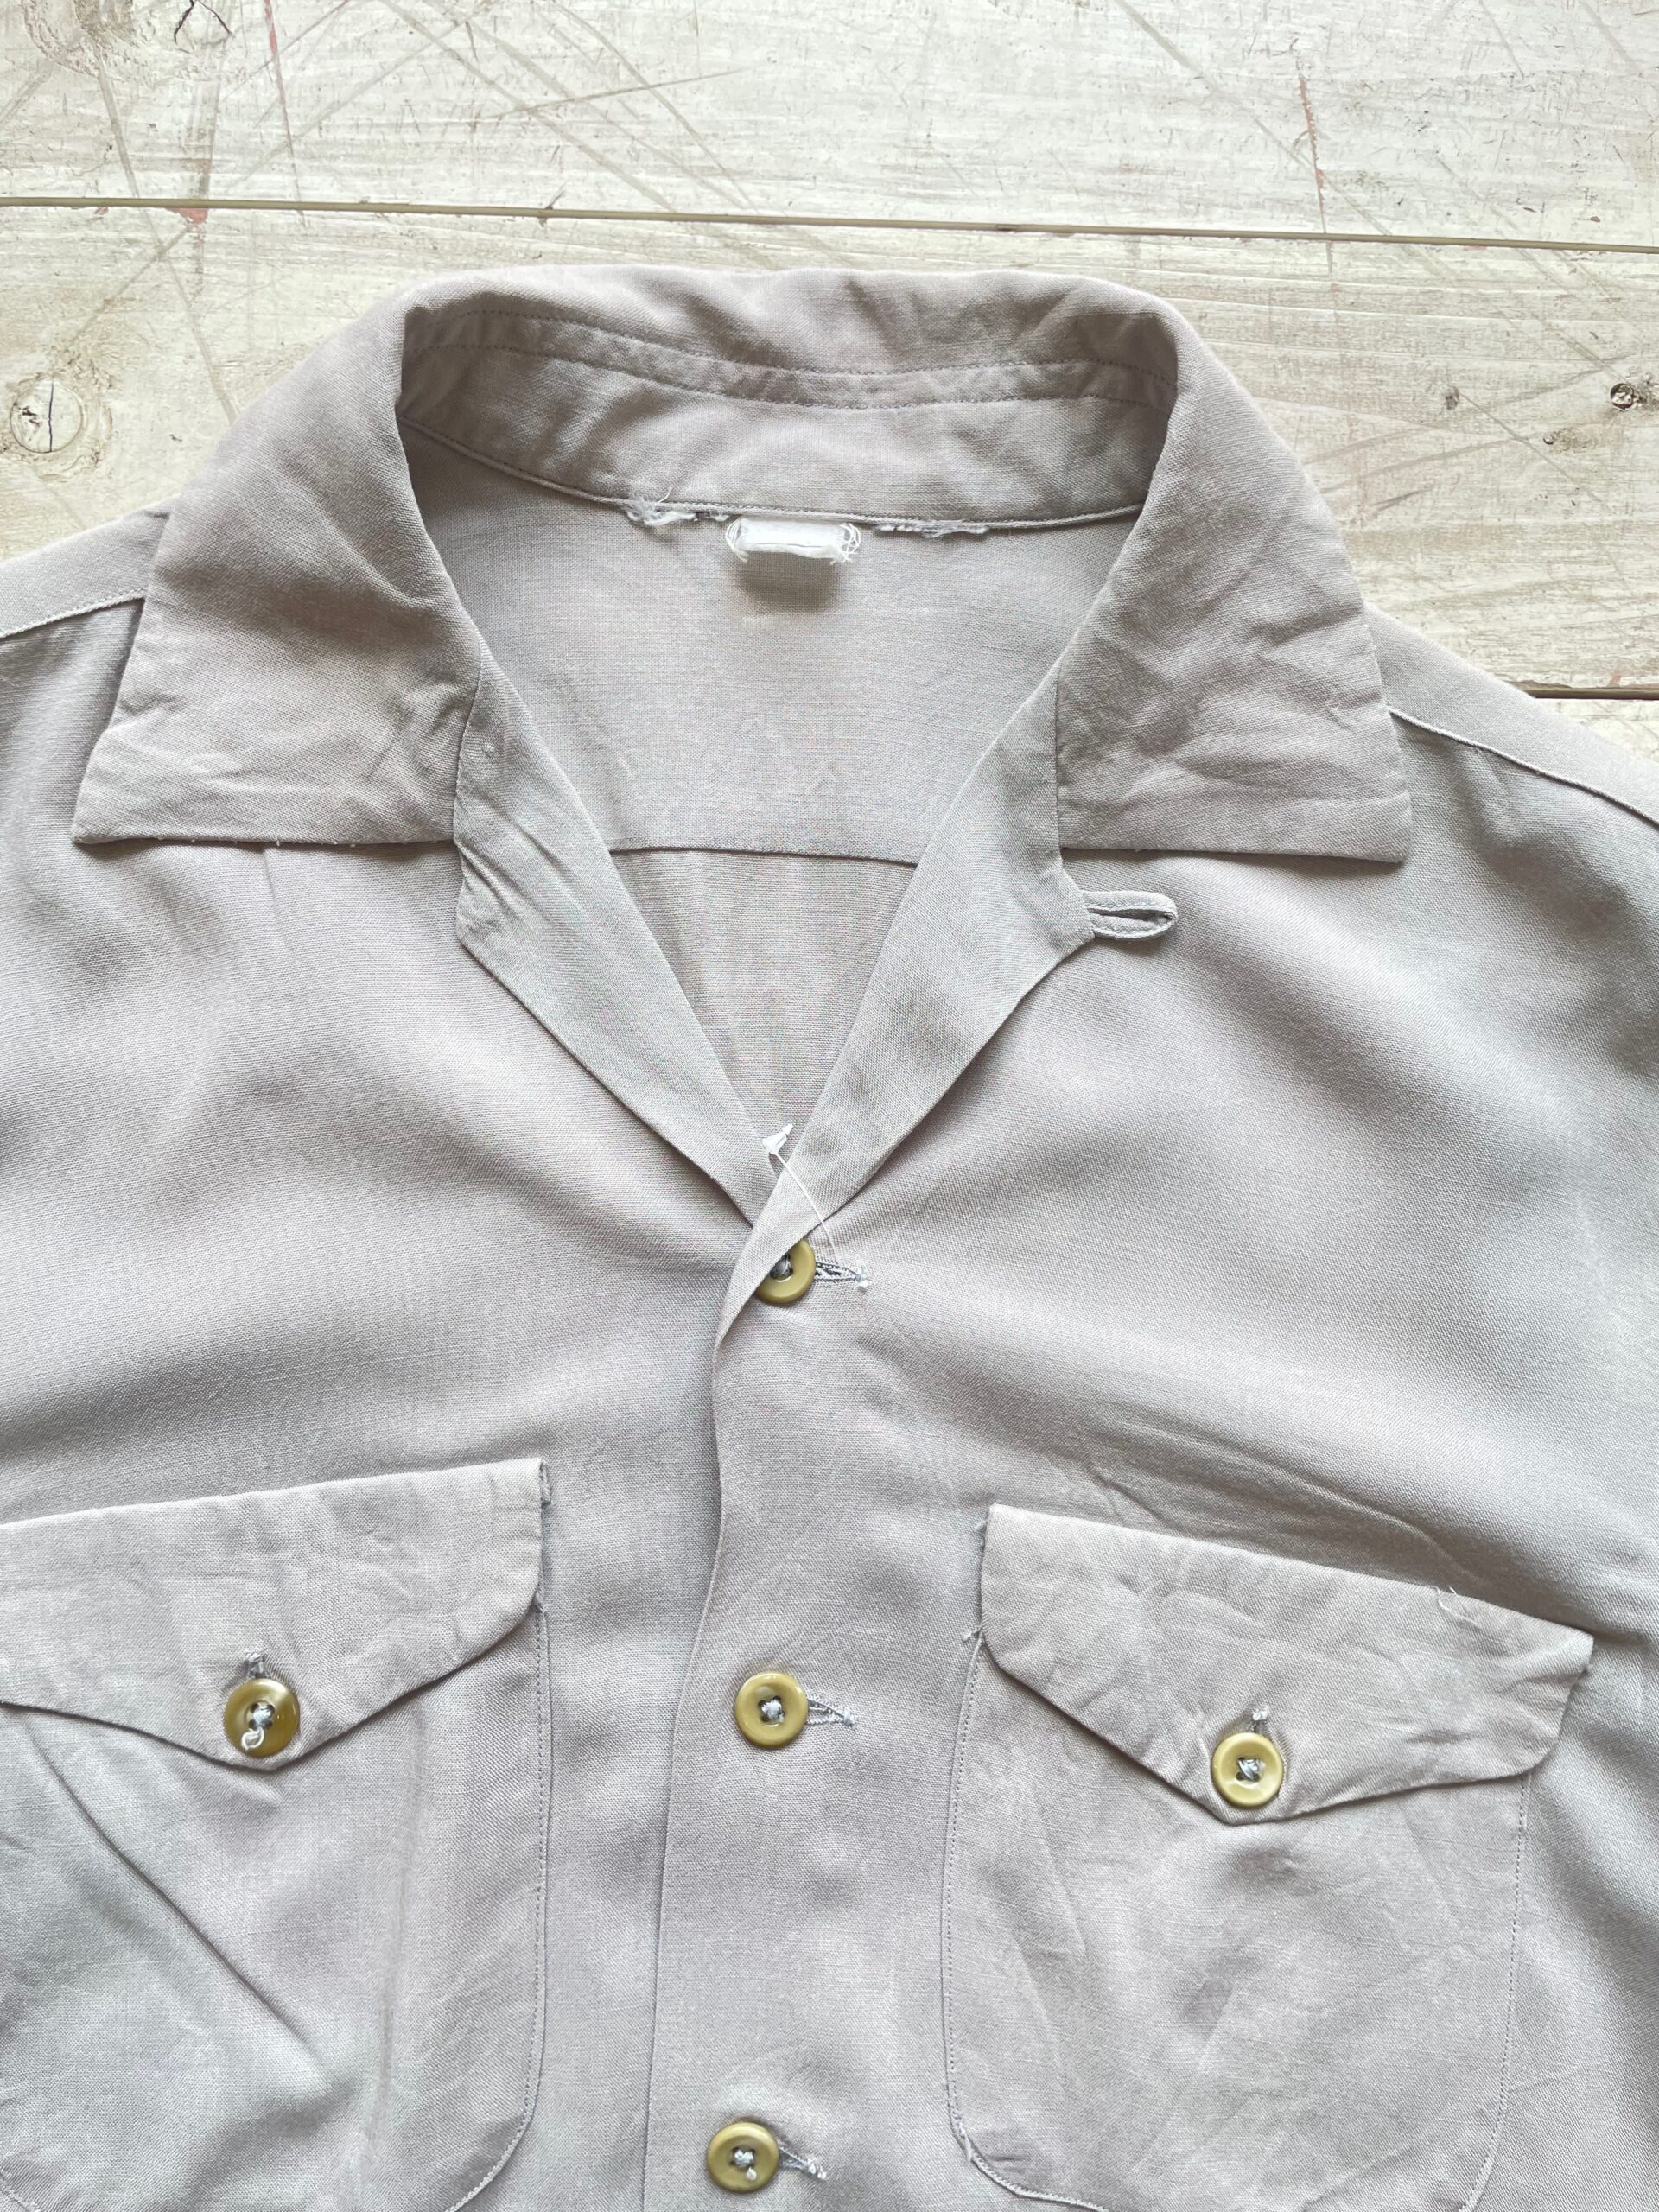 50〜60's Vintage S/S shirt マチ付き 古着 us古着 ヴィンテージシャツ 